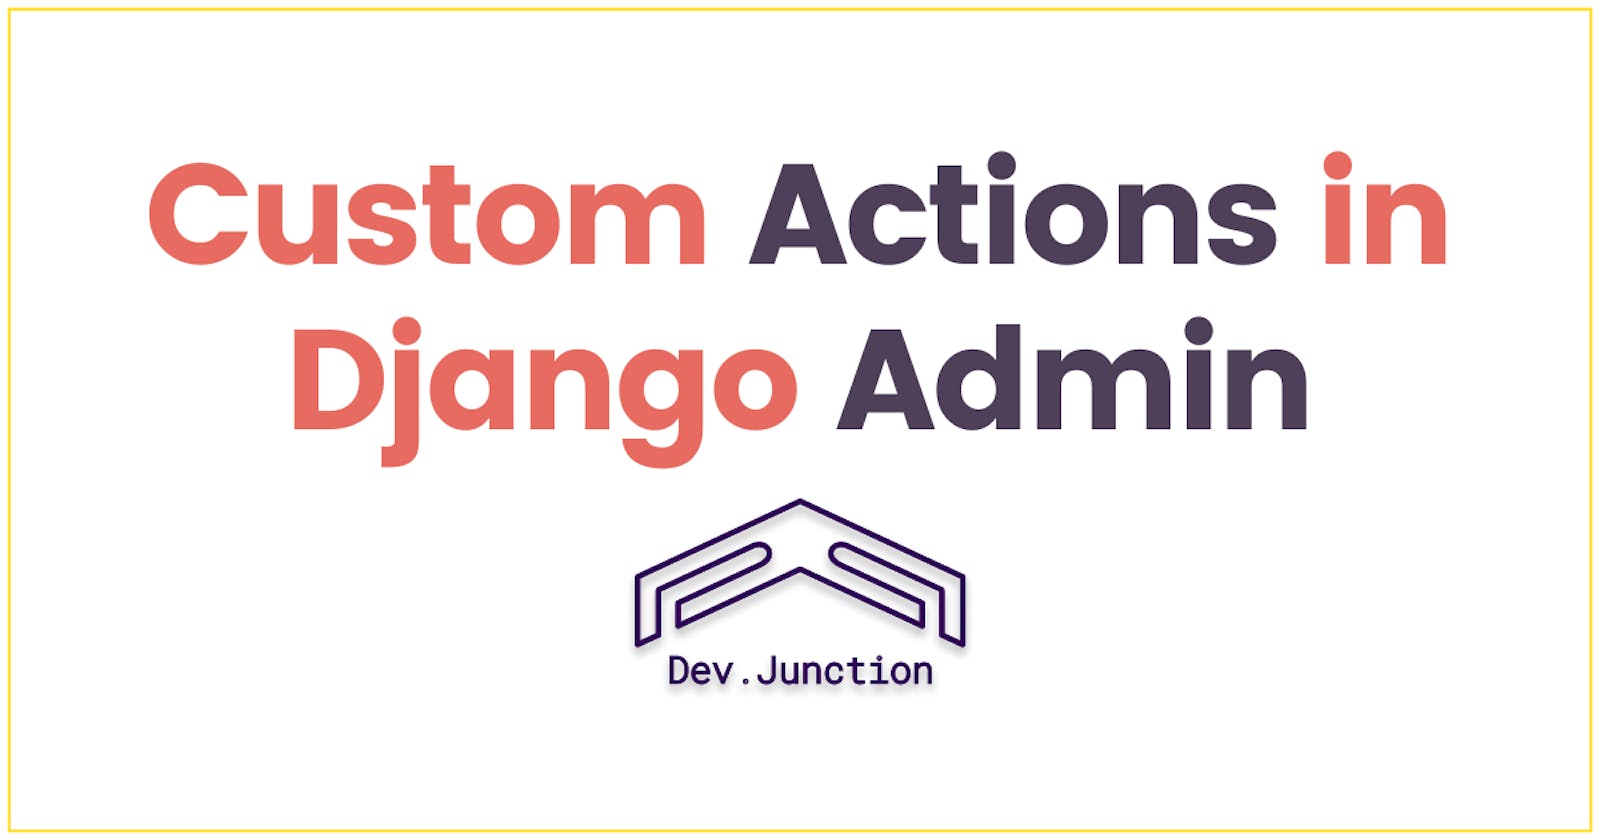 Django Admin 101: How to Add Custom Actions to the Model List View?